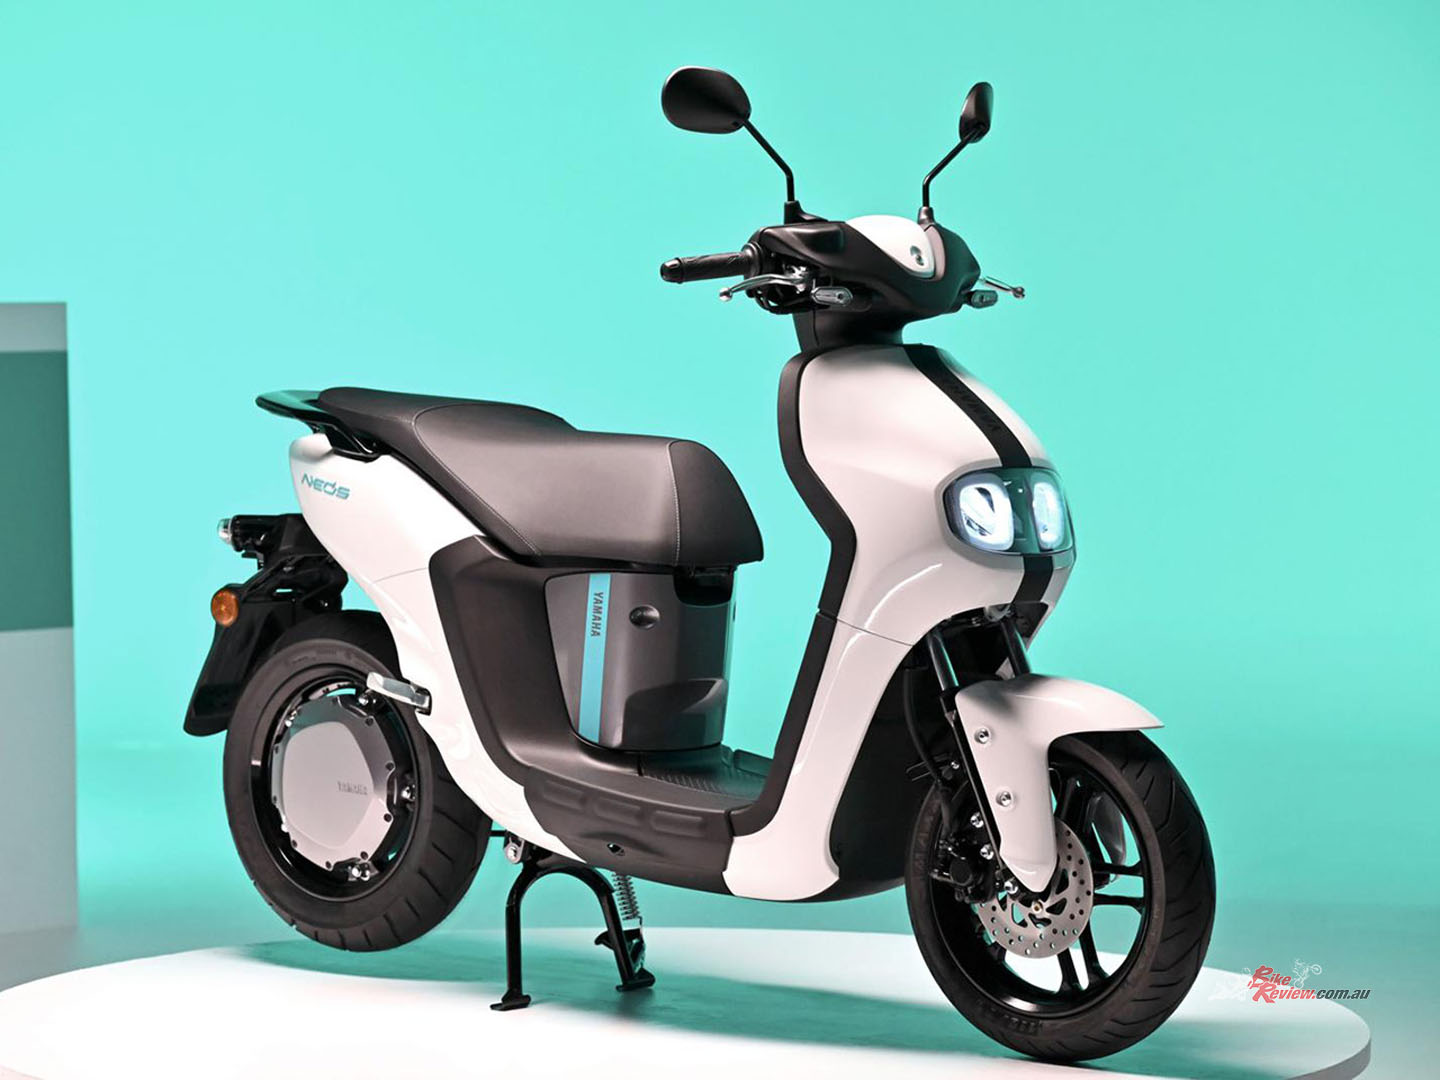 In the next few weeks Yamaha will launch the all-new NEO’s – a smart, accessible and high quality “50cc-equivalent” electric scooter that was first displayed at the 2019 Tokyo Motor Show as the E02 prototype